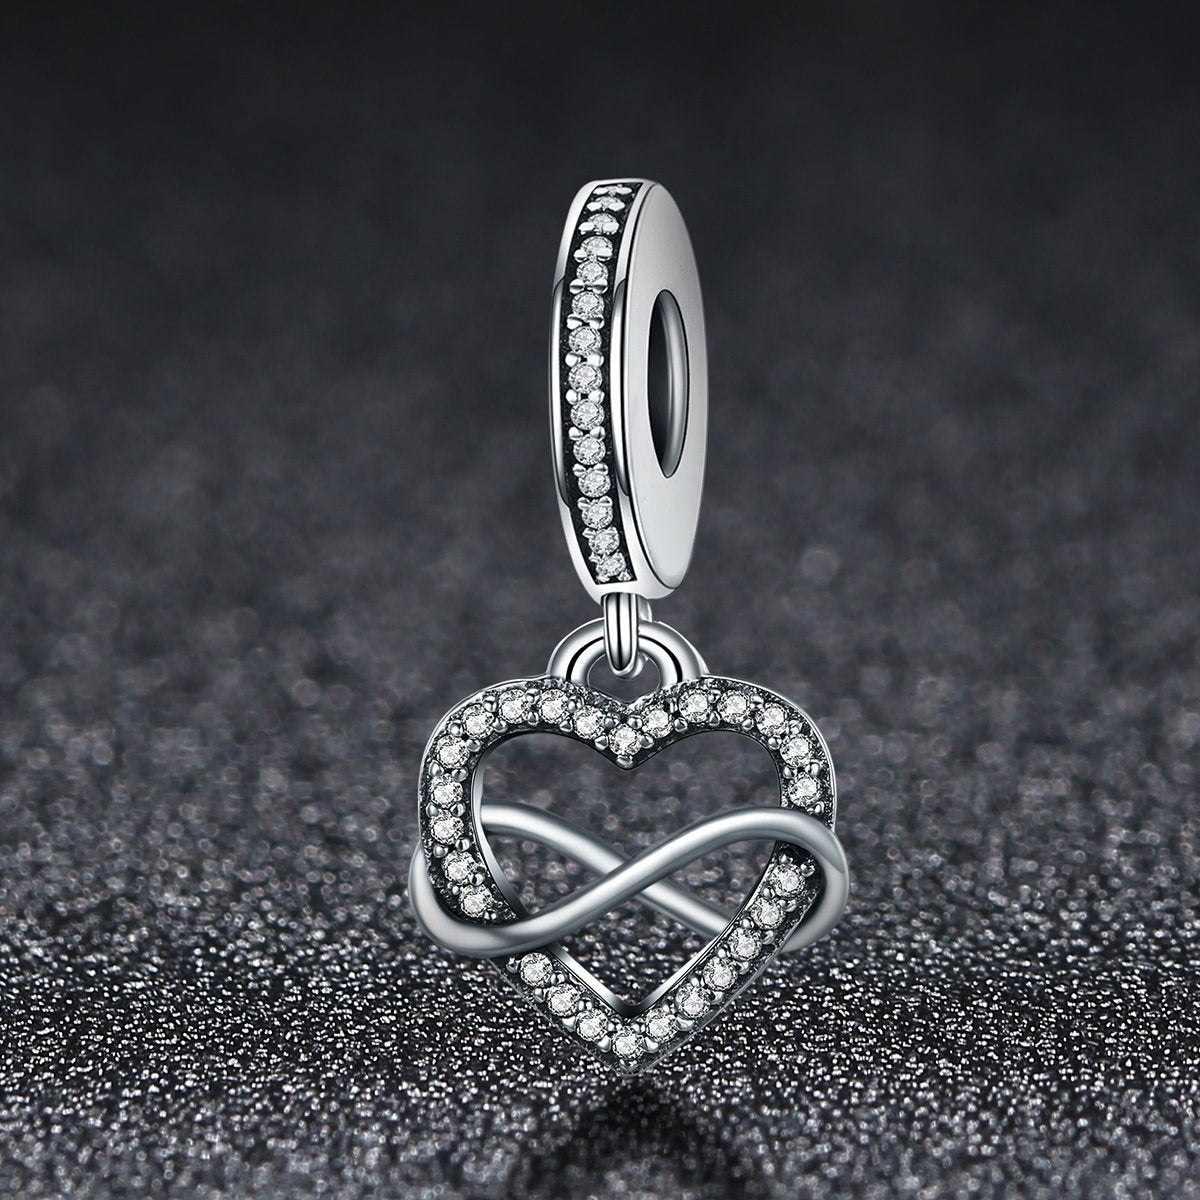 Sterling 925 silver charm the hold love bead pendant fits Pandora charm and European charm bracelet Xaxe.com